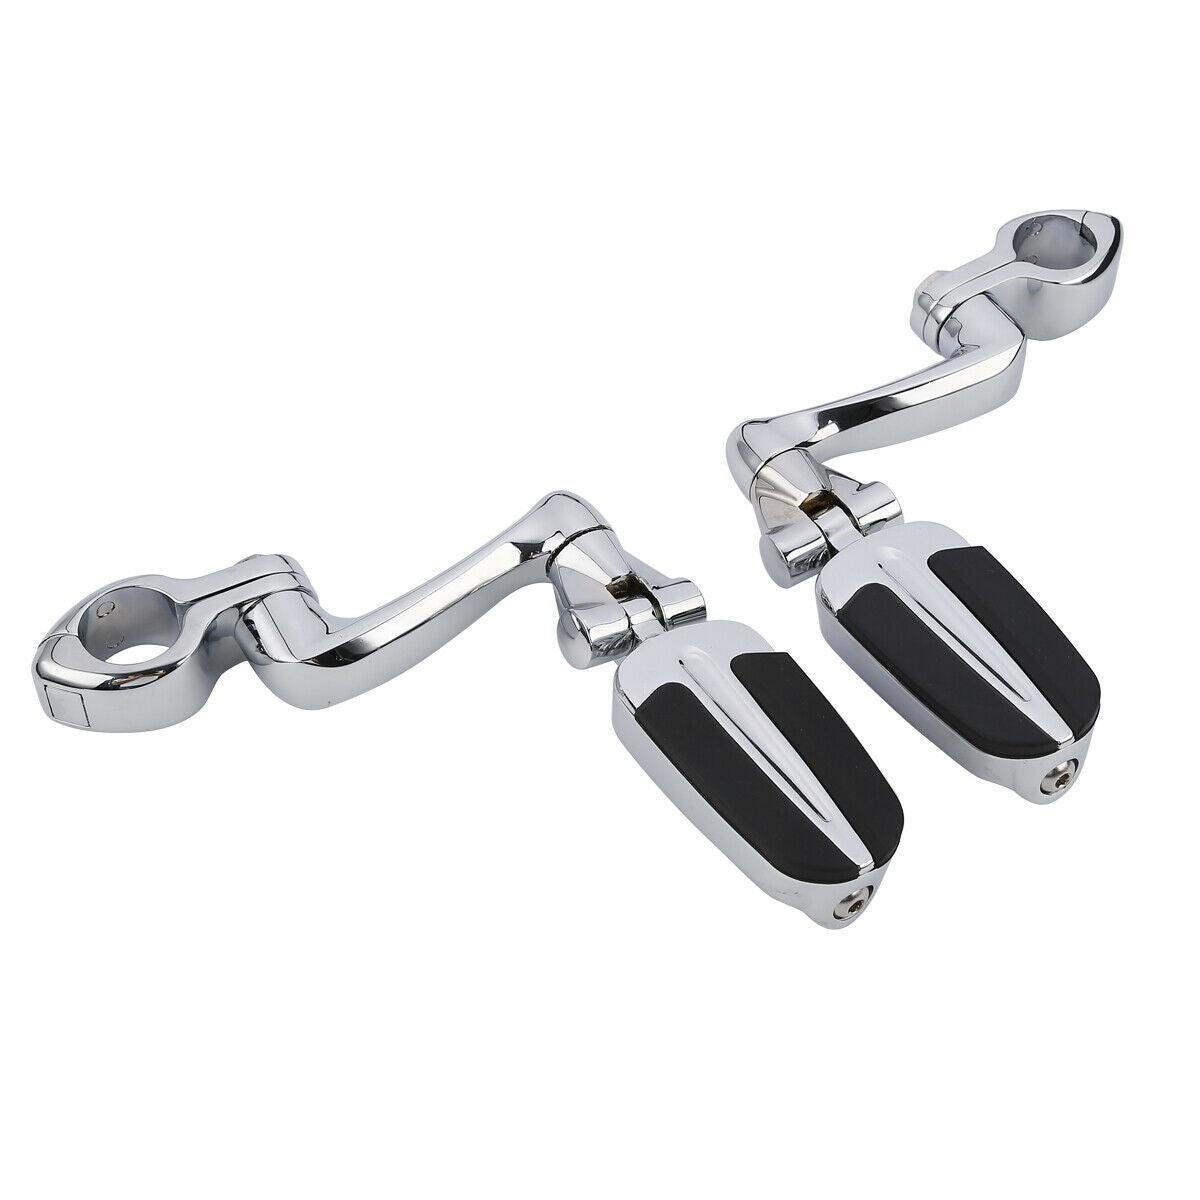 1 1/4" Highway Bar Footpegs Pegs Mount Fit For Harley Touring Road King Glide - Moto Life Products